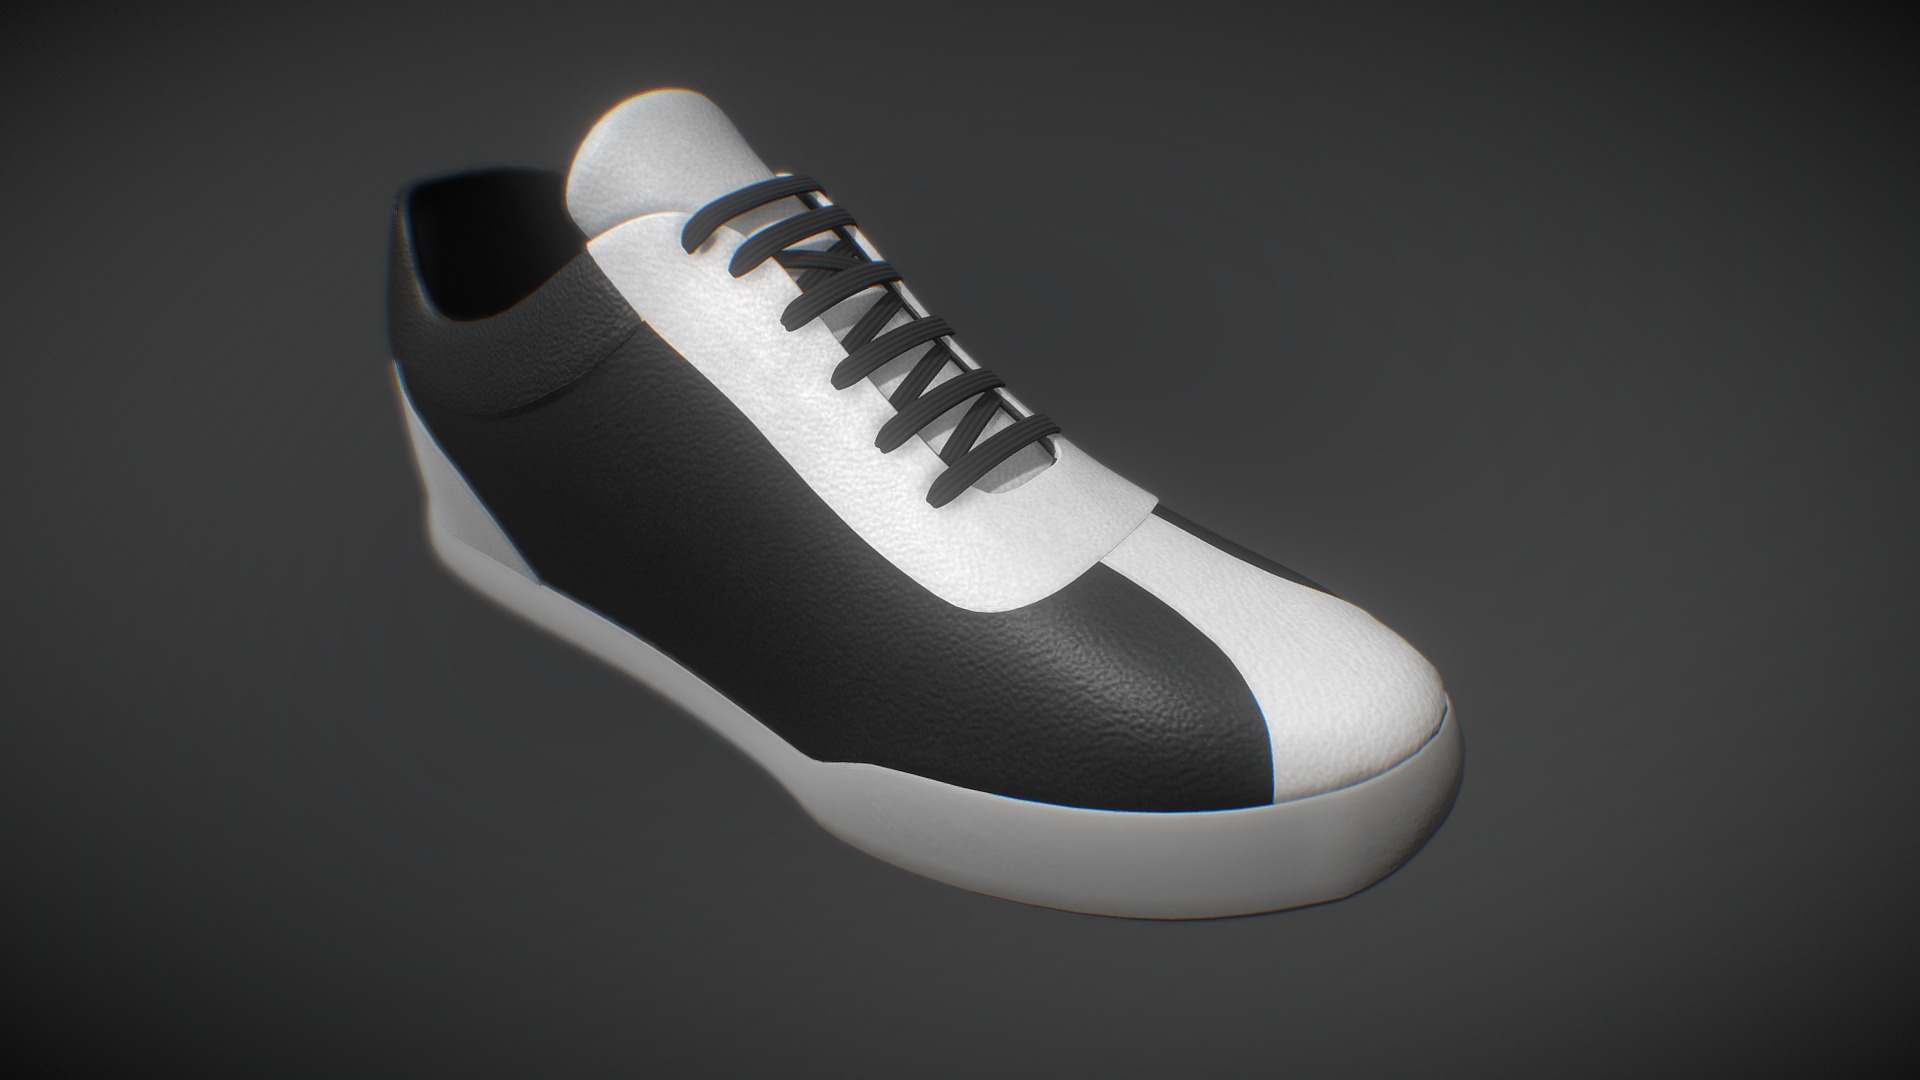 3D model PBR Trainer - This is a 3D model of the PBR Trainer. The 3D model is about a white and black shoe.